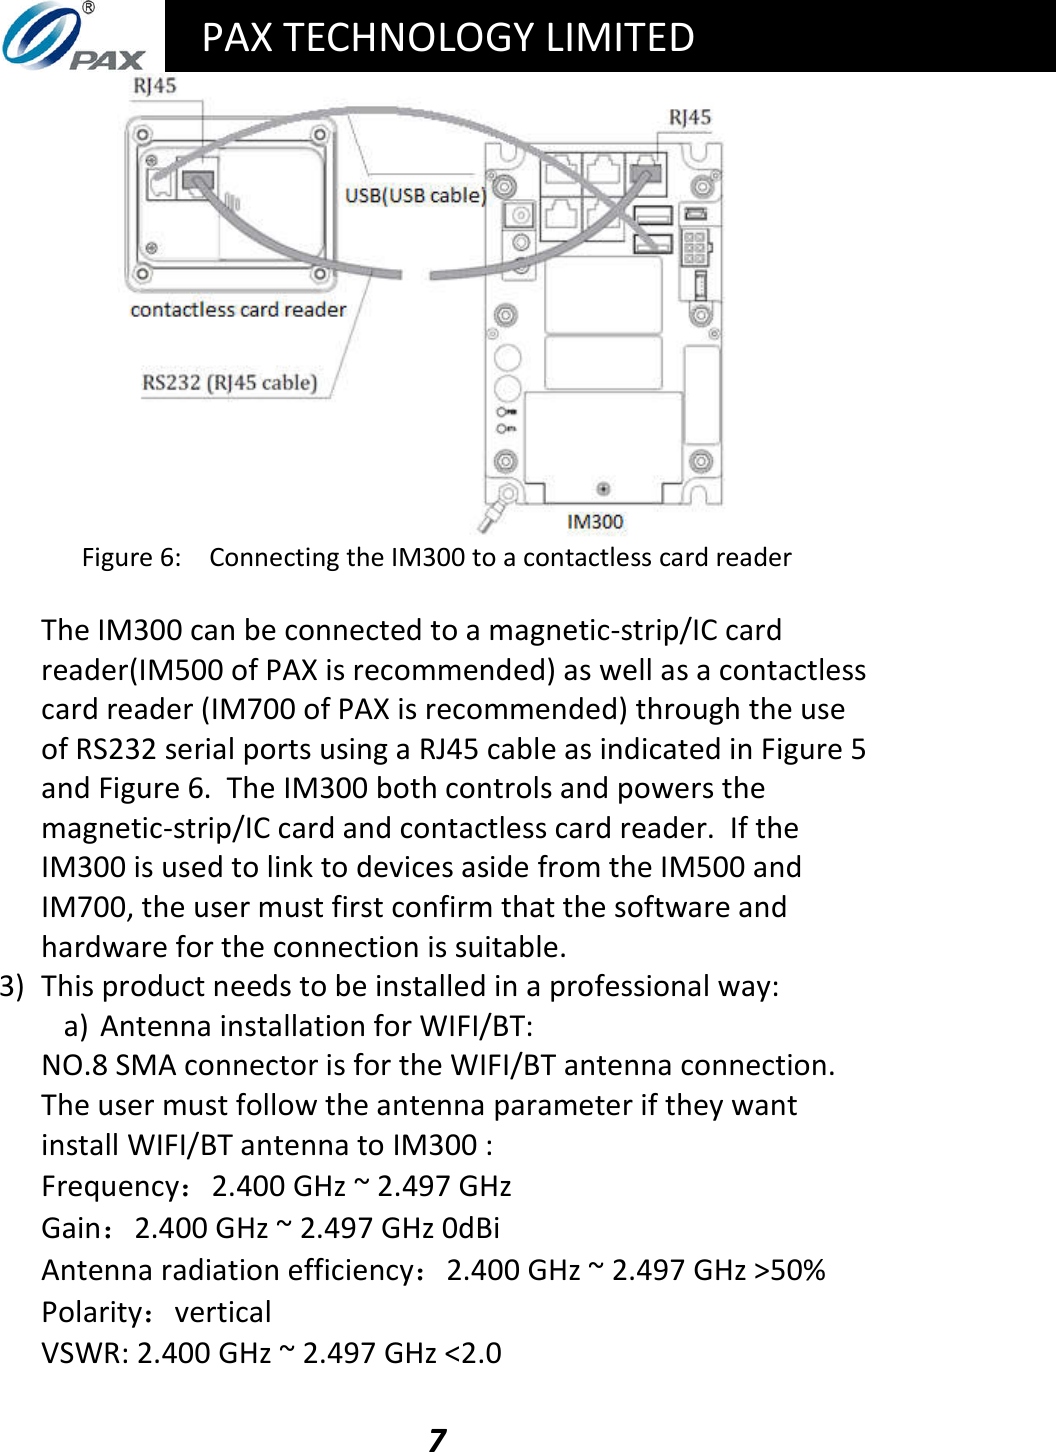   PAX TECHNOLOGY LIMITED  7  Figure 6:  Connecting the IM300 to a contactless card reader  The IM300 can be connected to a magnetic-strip/IC card reader(IM500 of PAX is recommended) as well as a contactless card reader (IM700 of PAX is recommended) through the use of RS232 serial ports using a RJ45 cable as indicated in Figure 5 and Figure 6.  The IM300 both controls and powers the magnetic-strip/IC card and contactless card reader.  If the IM300 is used to link to devices aside from the IM500 and IM700, the user must first confirm that the software and hardware for the connection is suitable. 3) This product needs to be installed in a professional way: a) Antenna installation for WIFI/BT: NO.8 SMA connector is for the WIFI/BT antenna connection. The user must follow the antenna parameter if they want install WIFI/BT antenna to IM300 :  Frequency：2.400 GHz ~ 2.497 GHz Gain：2.400 GHz ~ 2.497 GHz 0dBi Antenna radiation efficiency：2.400 GHz ~ 2.497 GHz &gt;50% Polarity：vertical VSWR: 2.400 GHz ~ 2.497 GHz &lt;2.0 